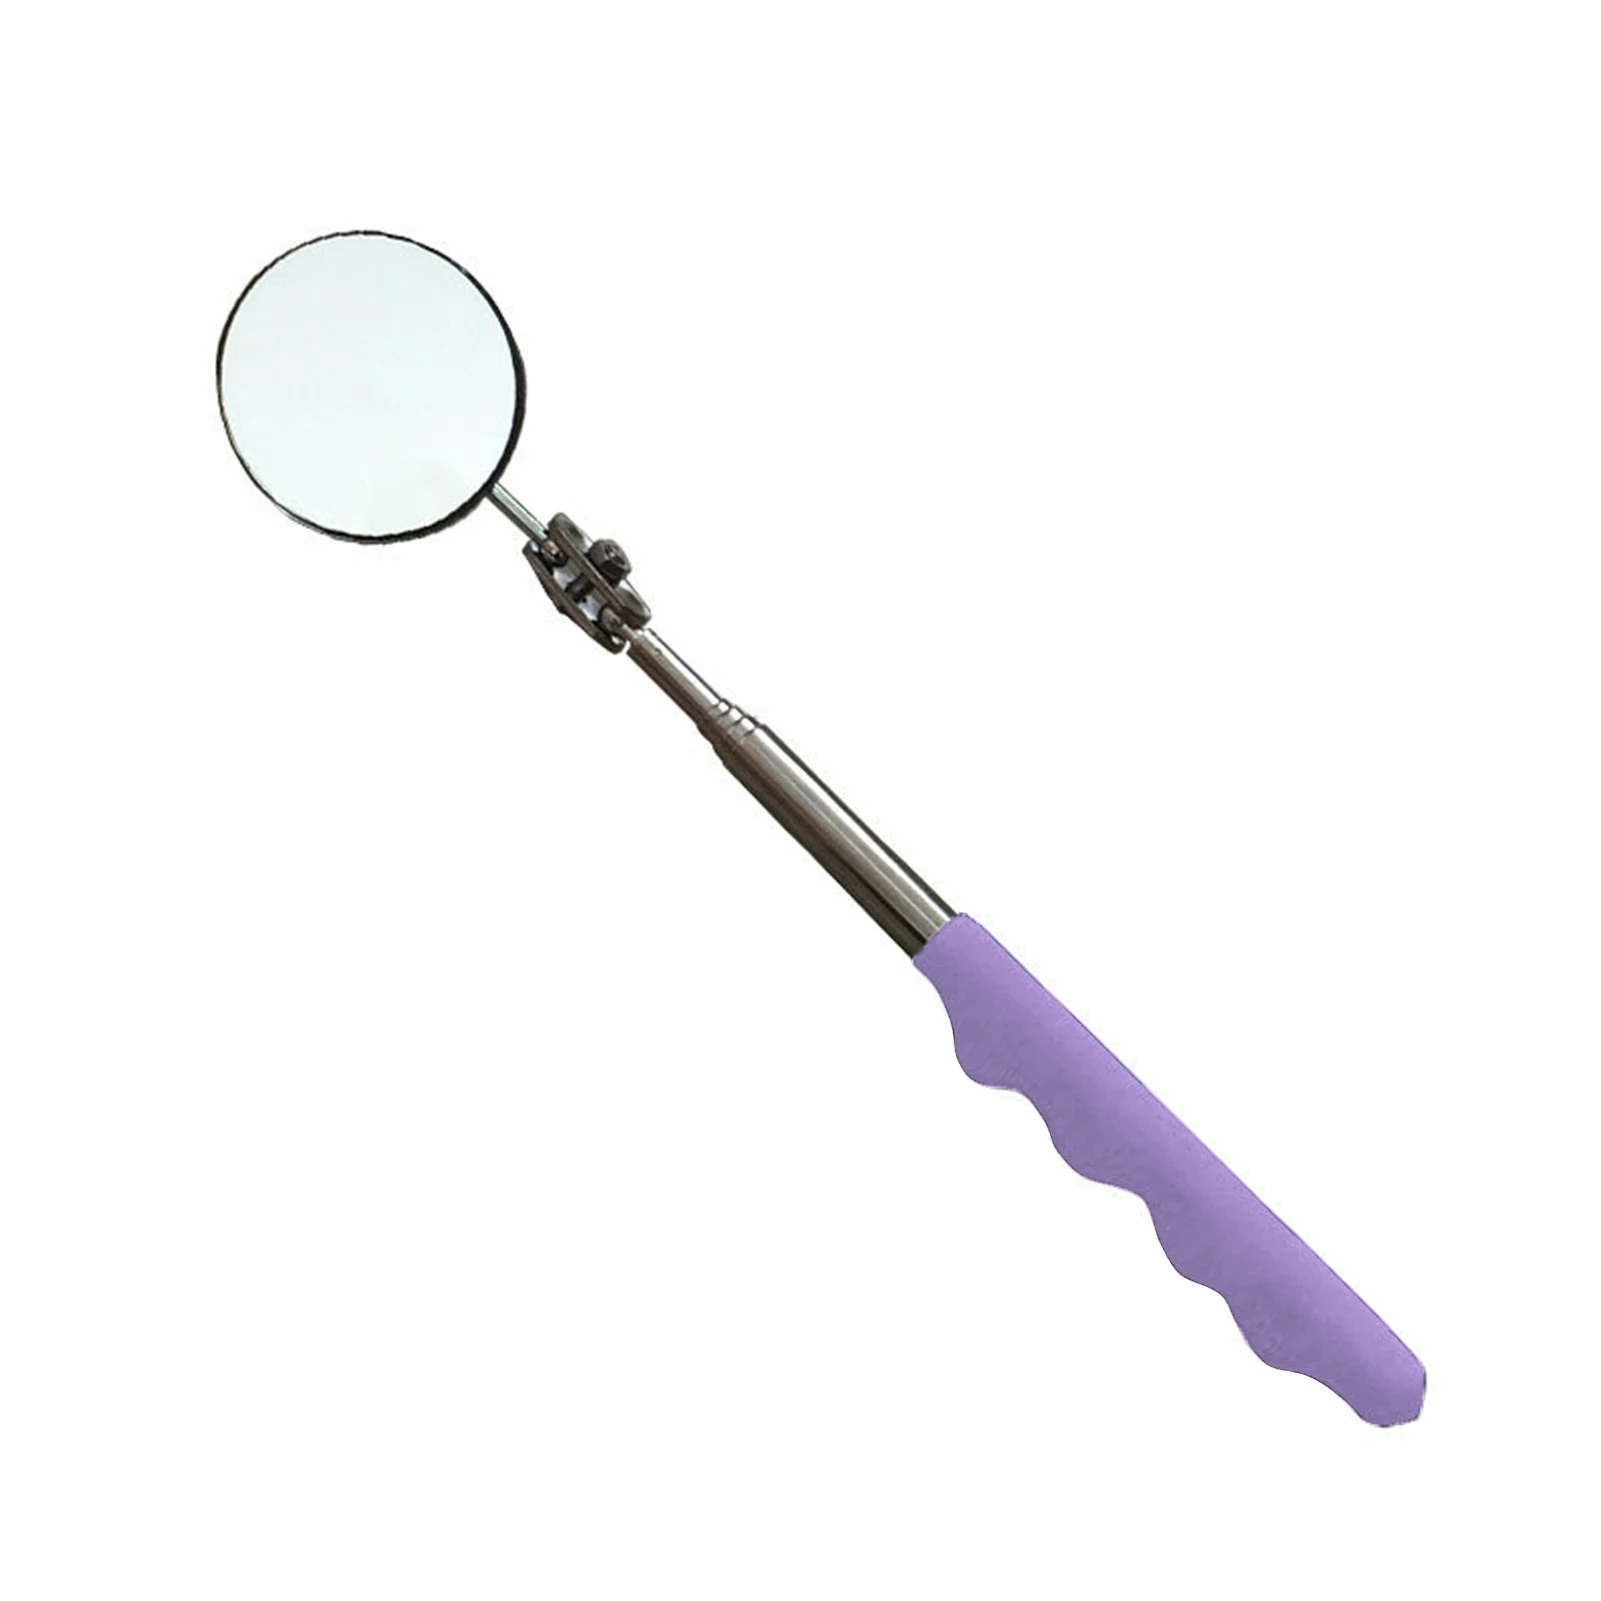 Telescopic Inspection 60mm Round Mirror With 360° Swivel Head Extends Up To 45cm Ideal For Automotive Car Repairs 